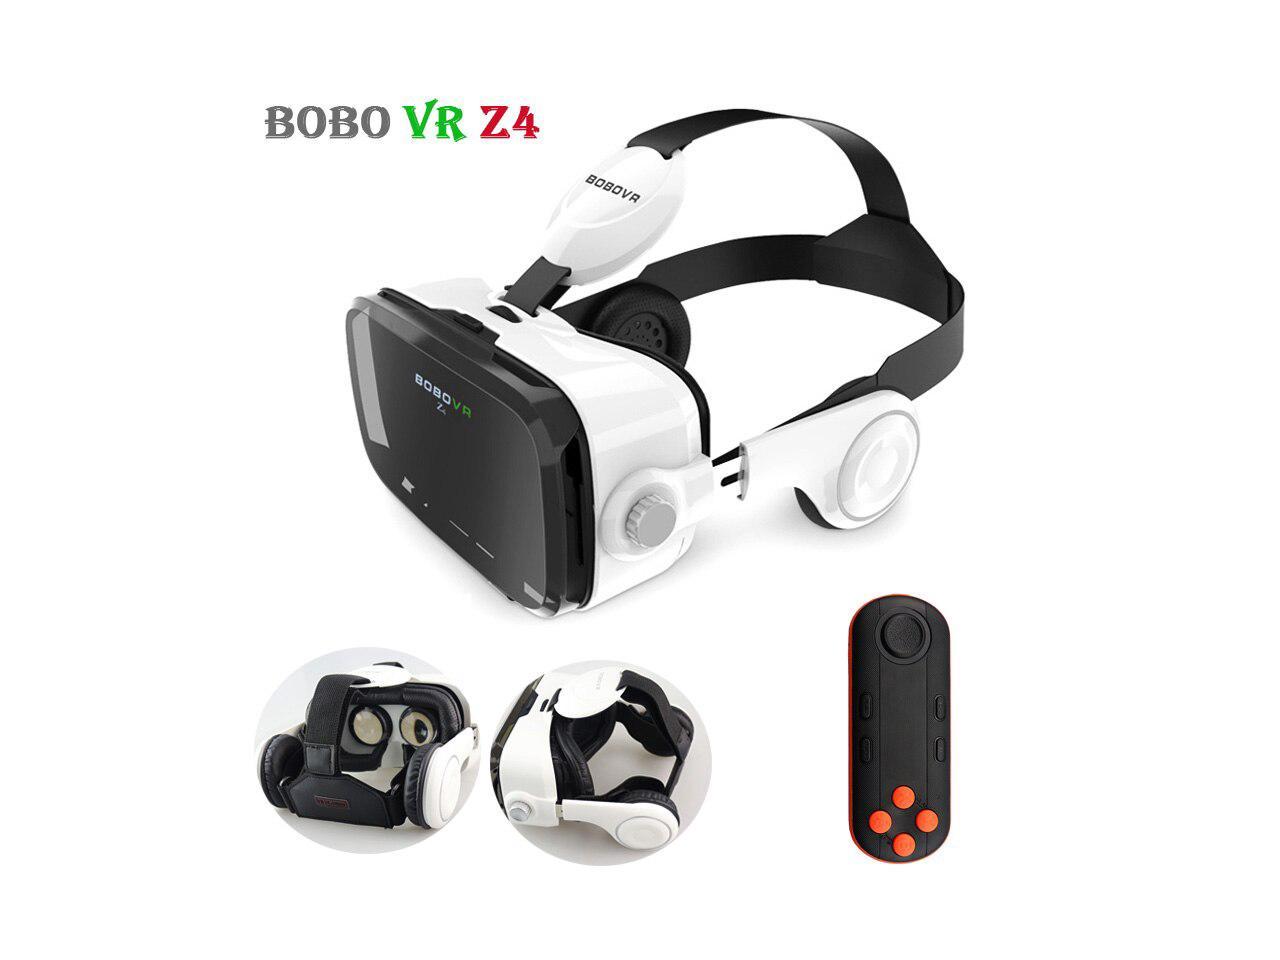 HISPETECH BOBOVR Z4 Original VR Headset Leather 3D Cardboard Helmet Virtual Reality VR Glasses Headset Stereo Box with Controller for Android Smartphone 4-6'